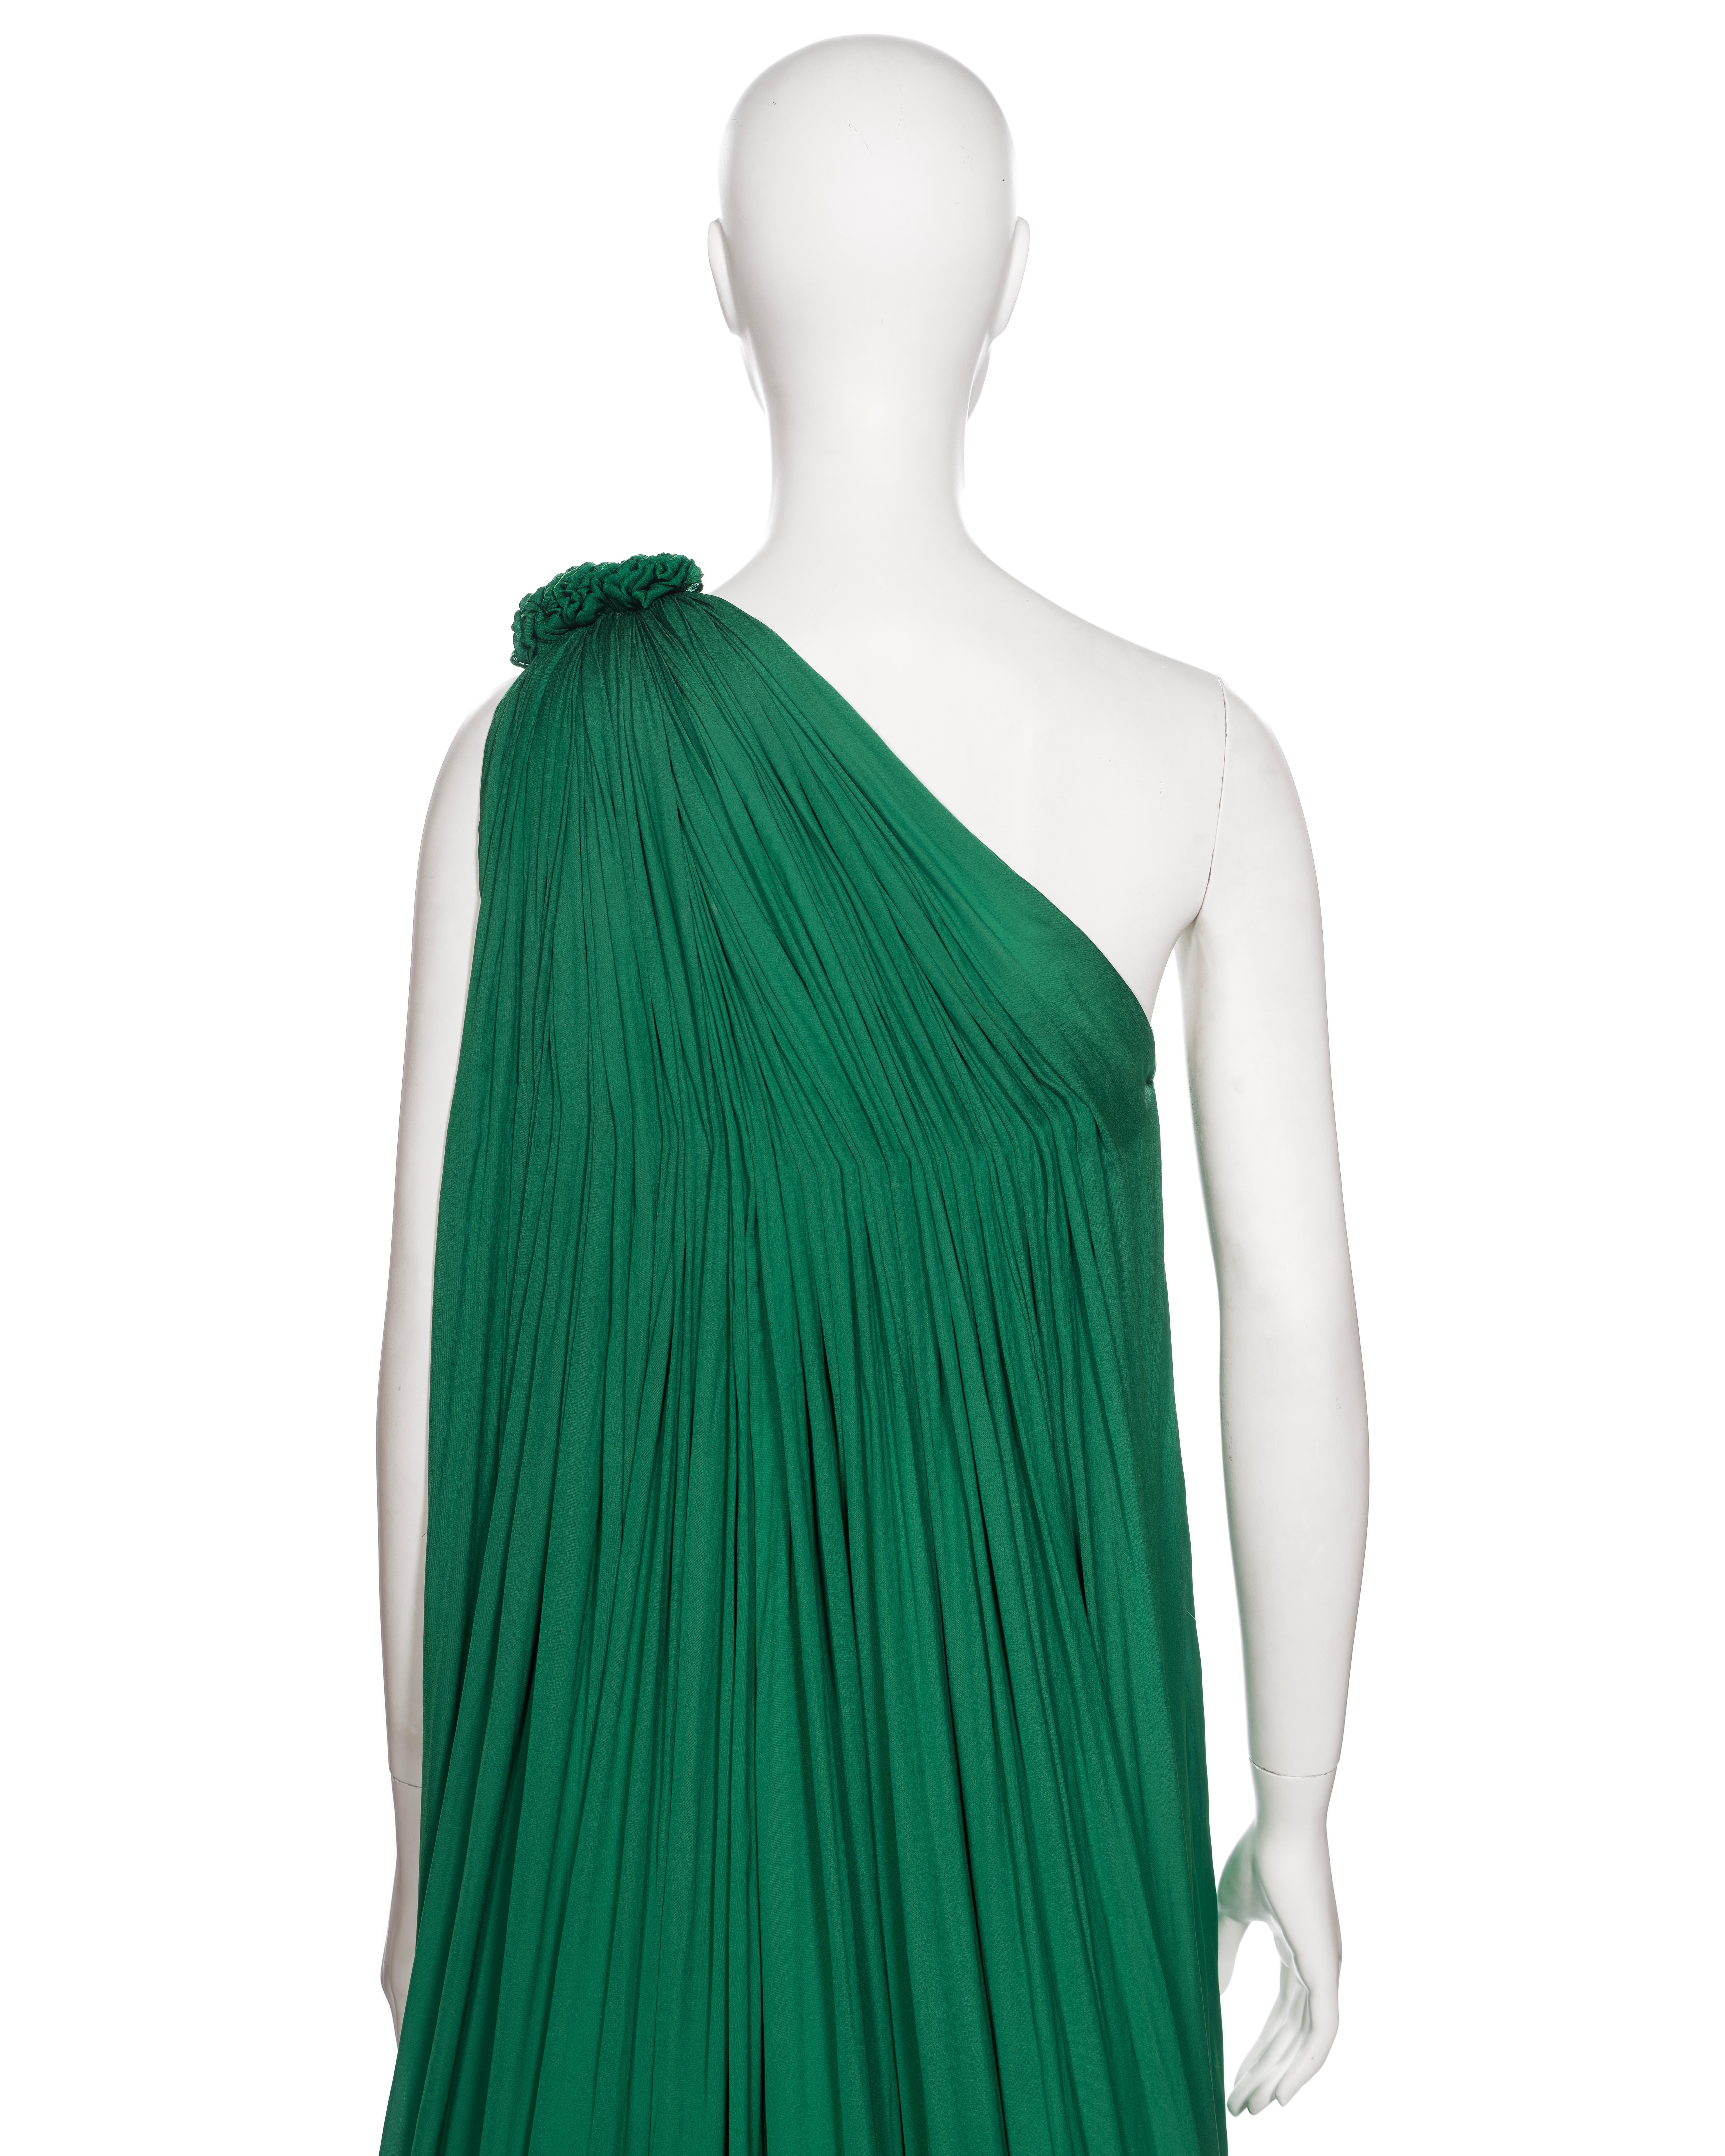 Lanvin by Alber Elbaz Green Pleated One-Shoulder Evening Dress, SS 2008 For Sale 5